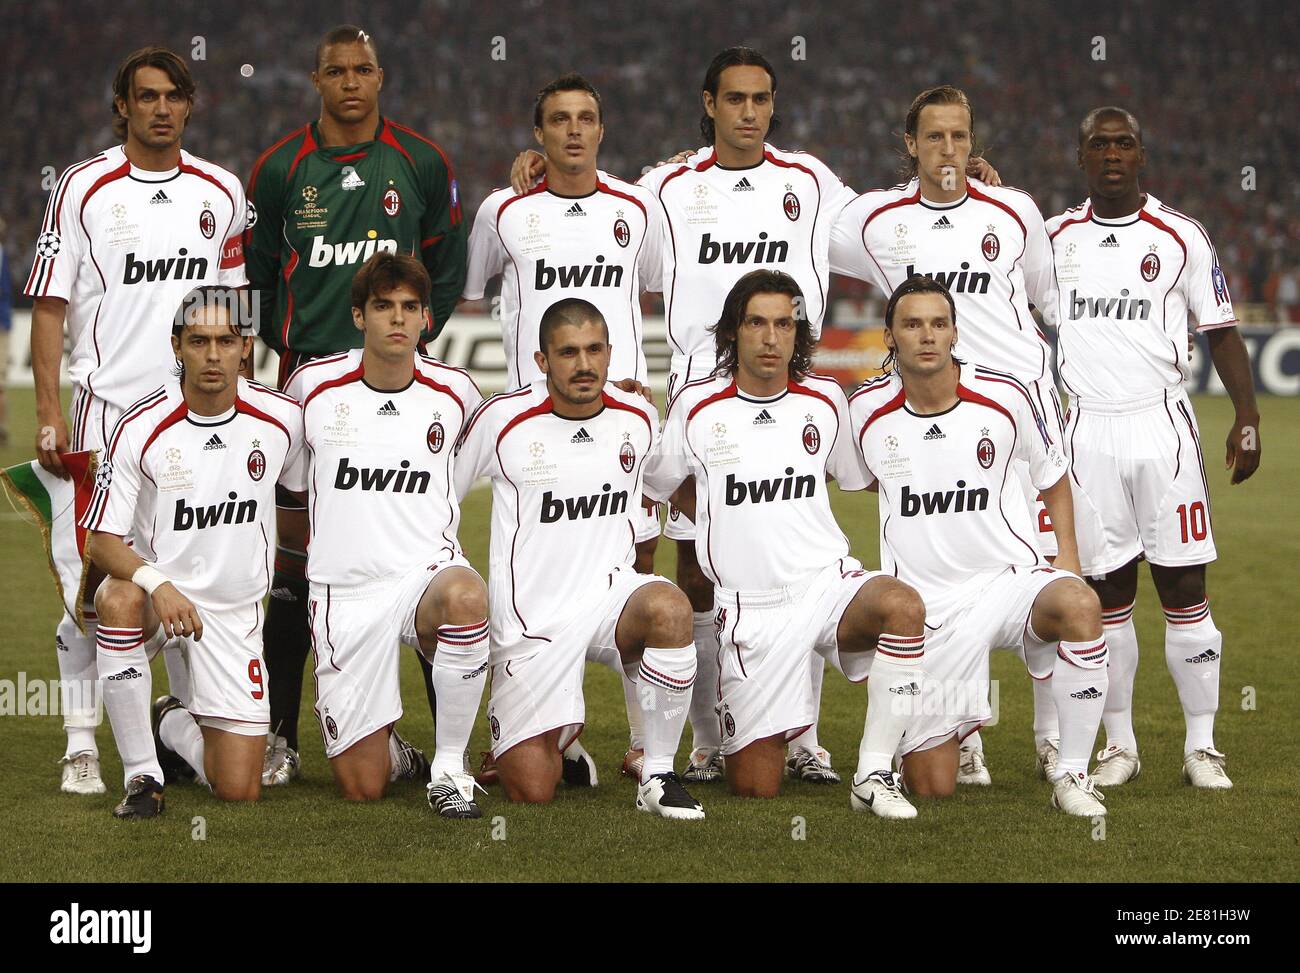 Ac Milan 2007 High Resolution Stock Photography and Images - Alamy